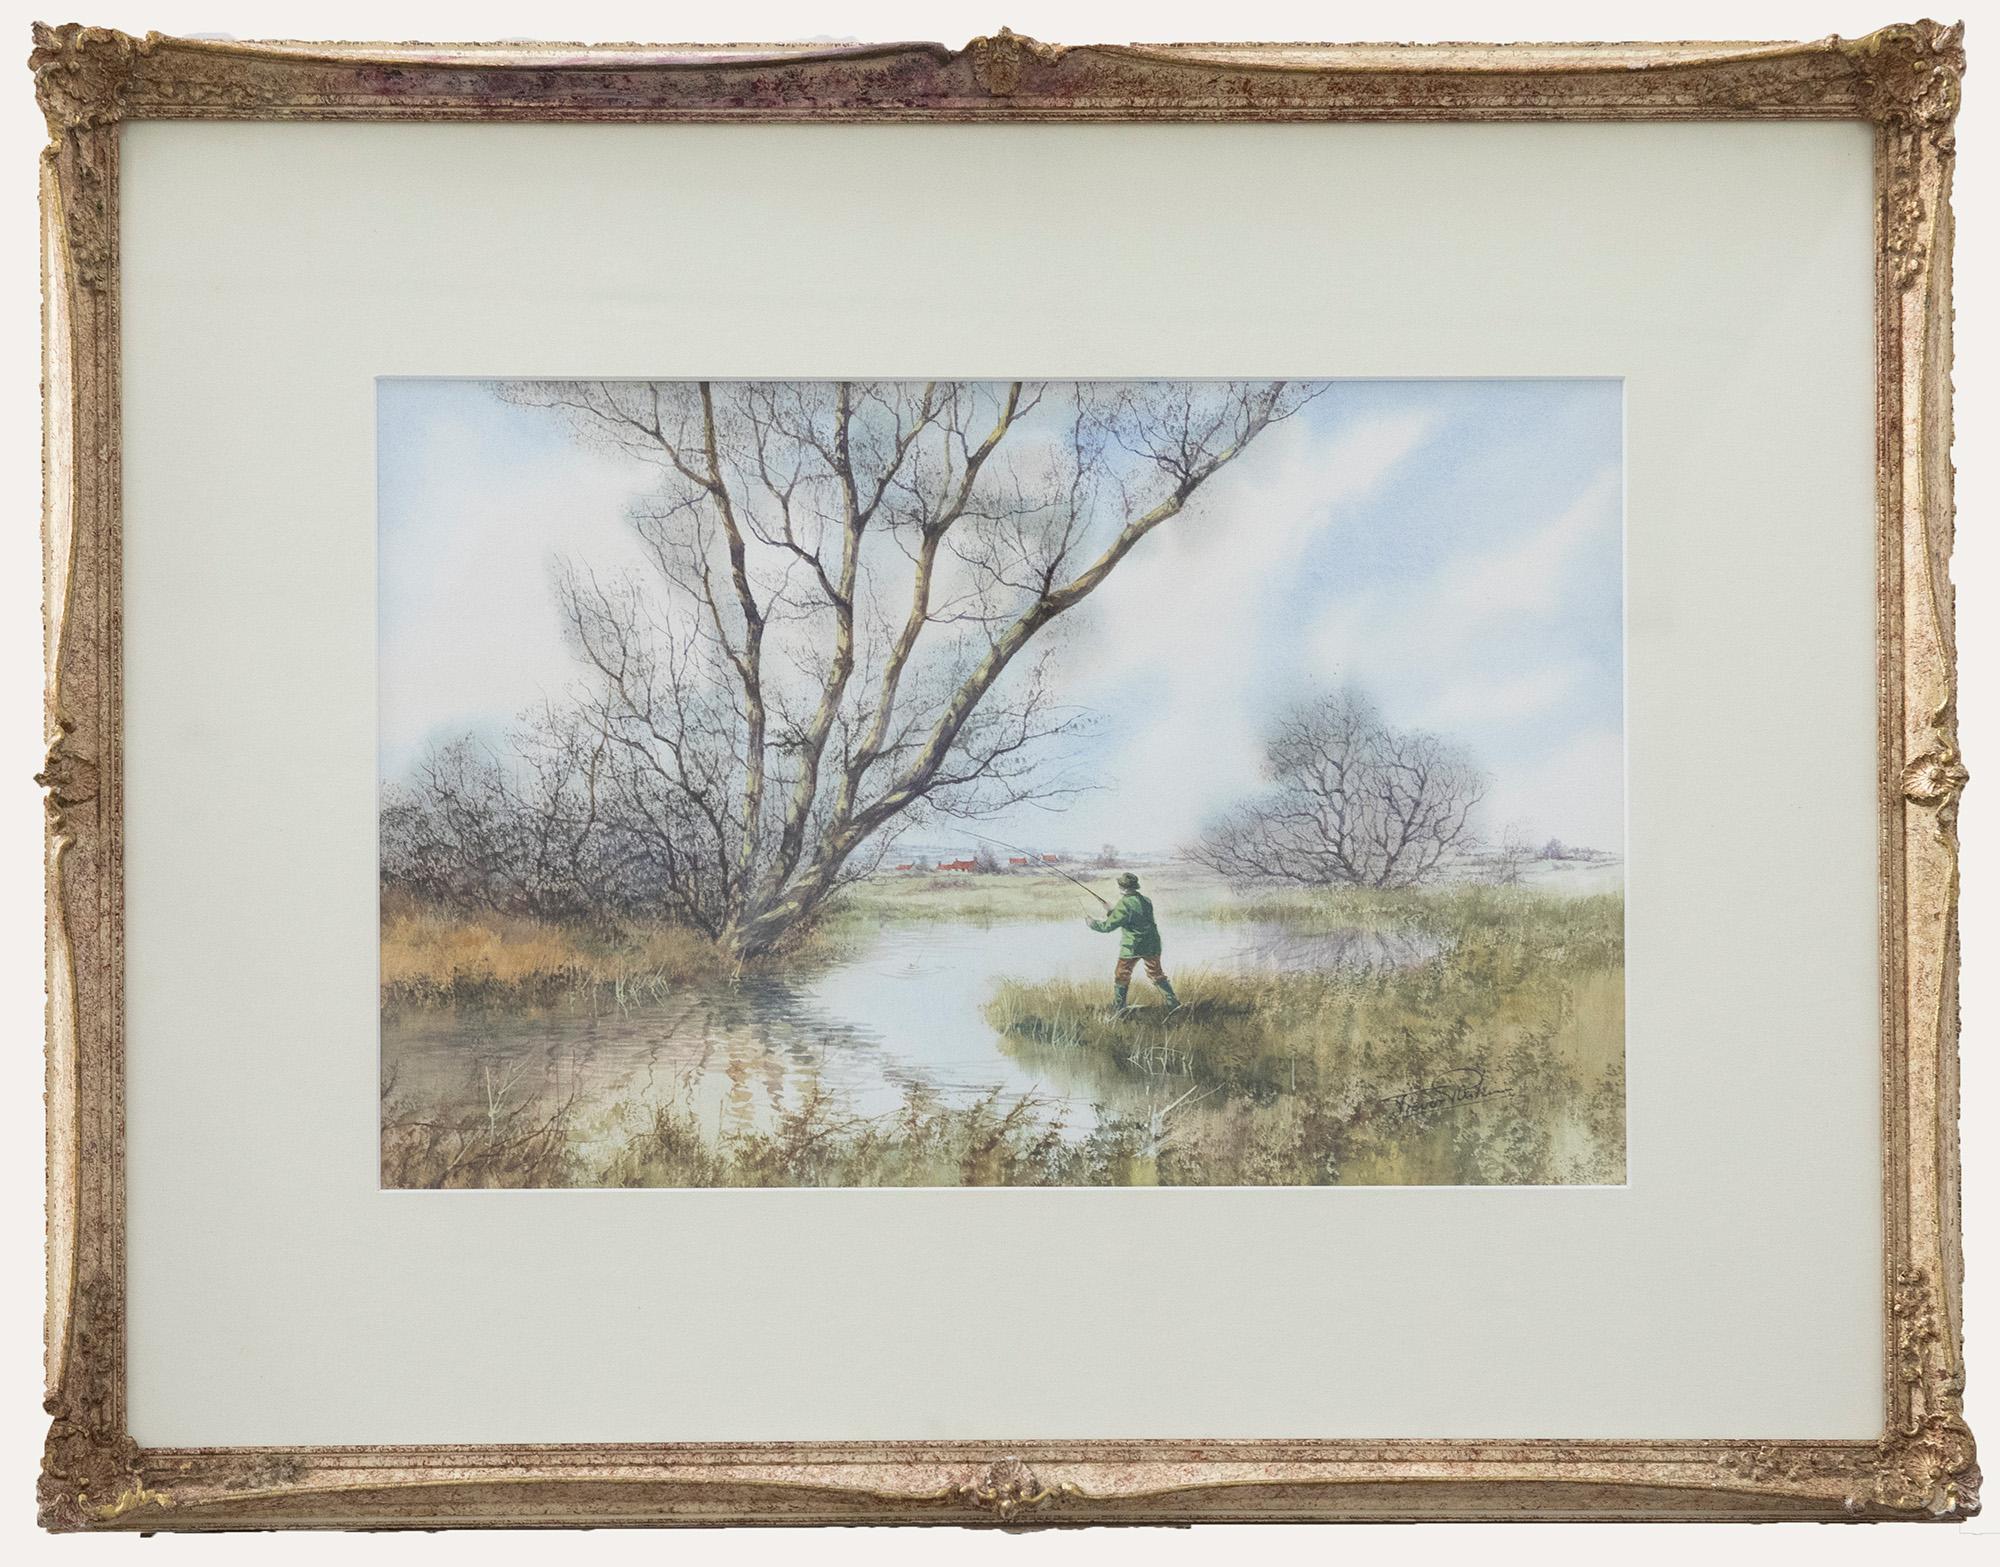 A finely painted watercolour landscape by the 20th century artist Trevor Parkin (b.1935). The scene depicts a happy angler reeling in a catch from the river. The watercolour has been signed by the artist to the lower left. Well-presented in a